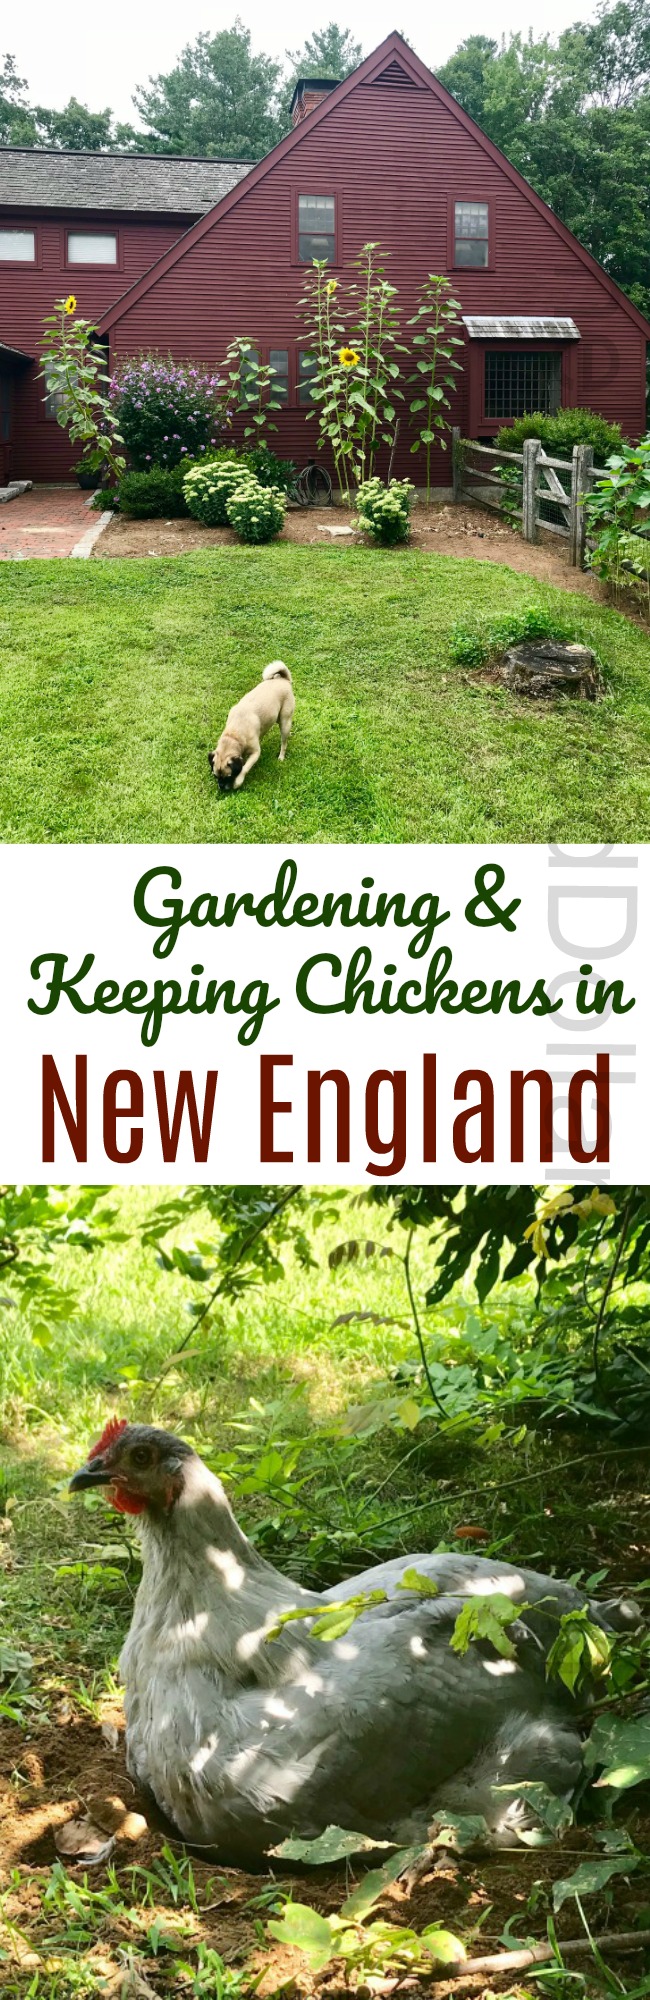 Gardening in New England – An Update on the Chicken Run and The Backyard Vegetable Garden Tally for 8/22/2018